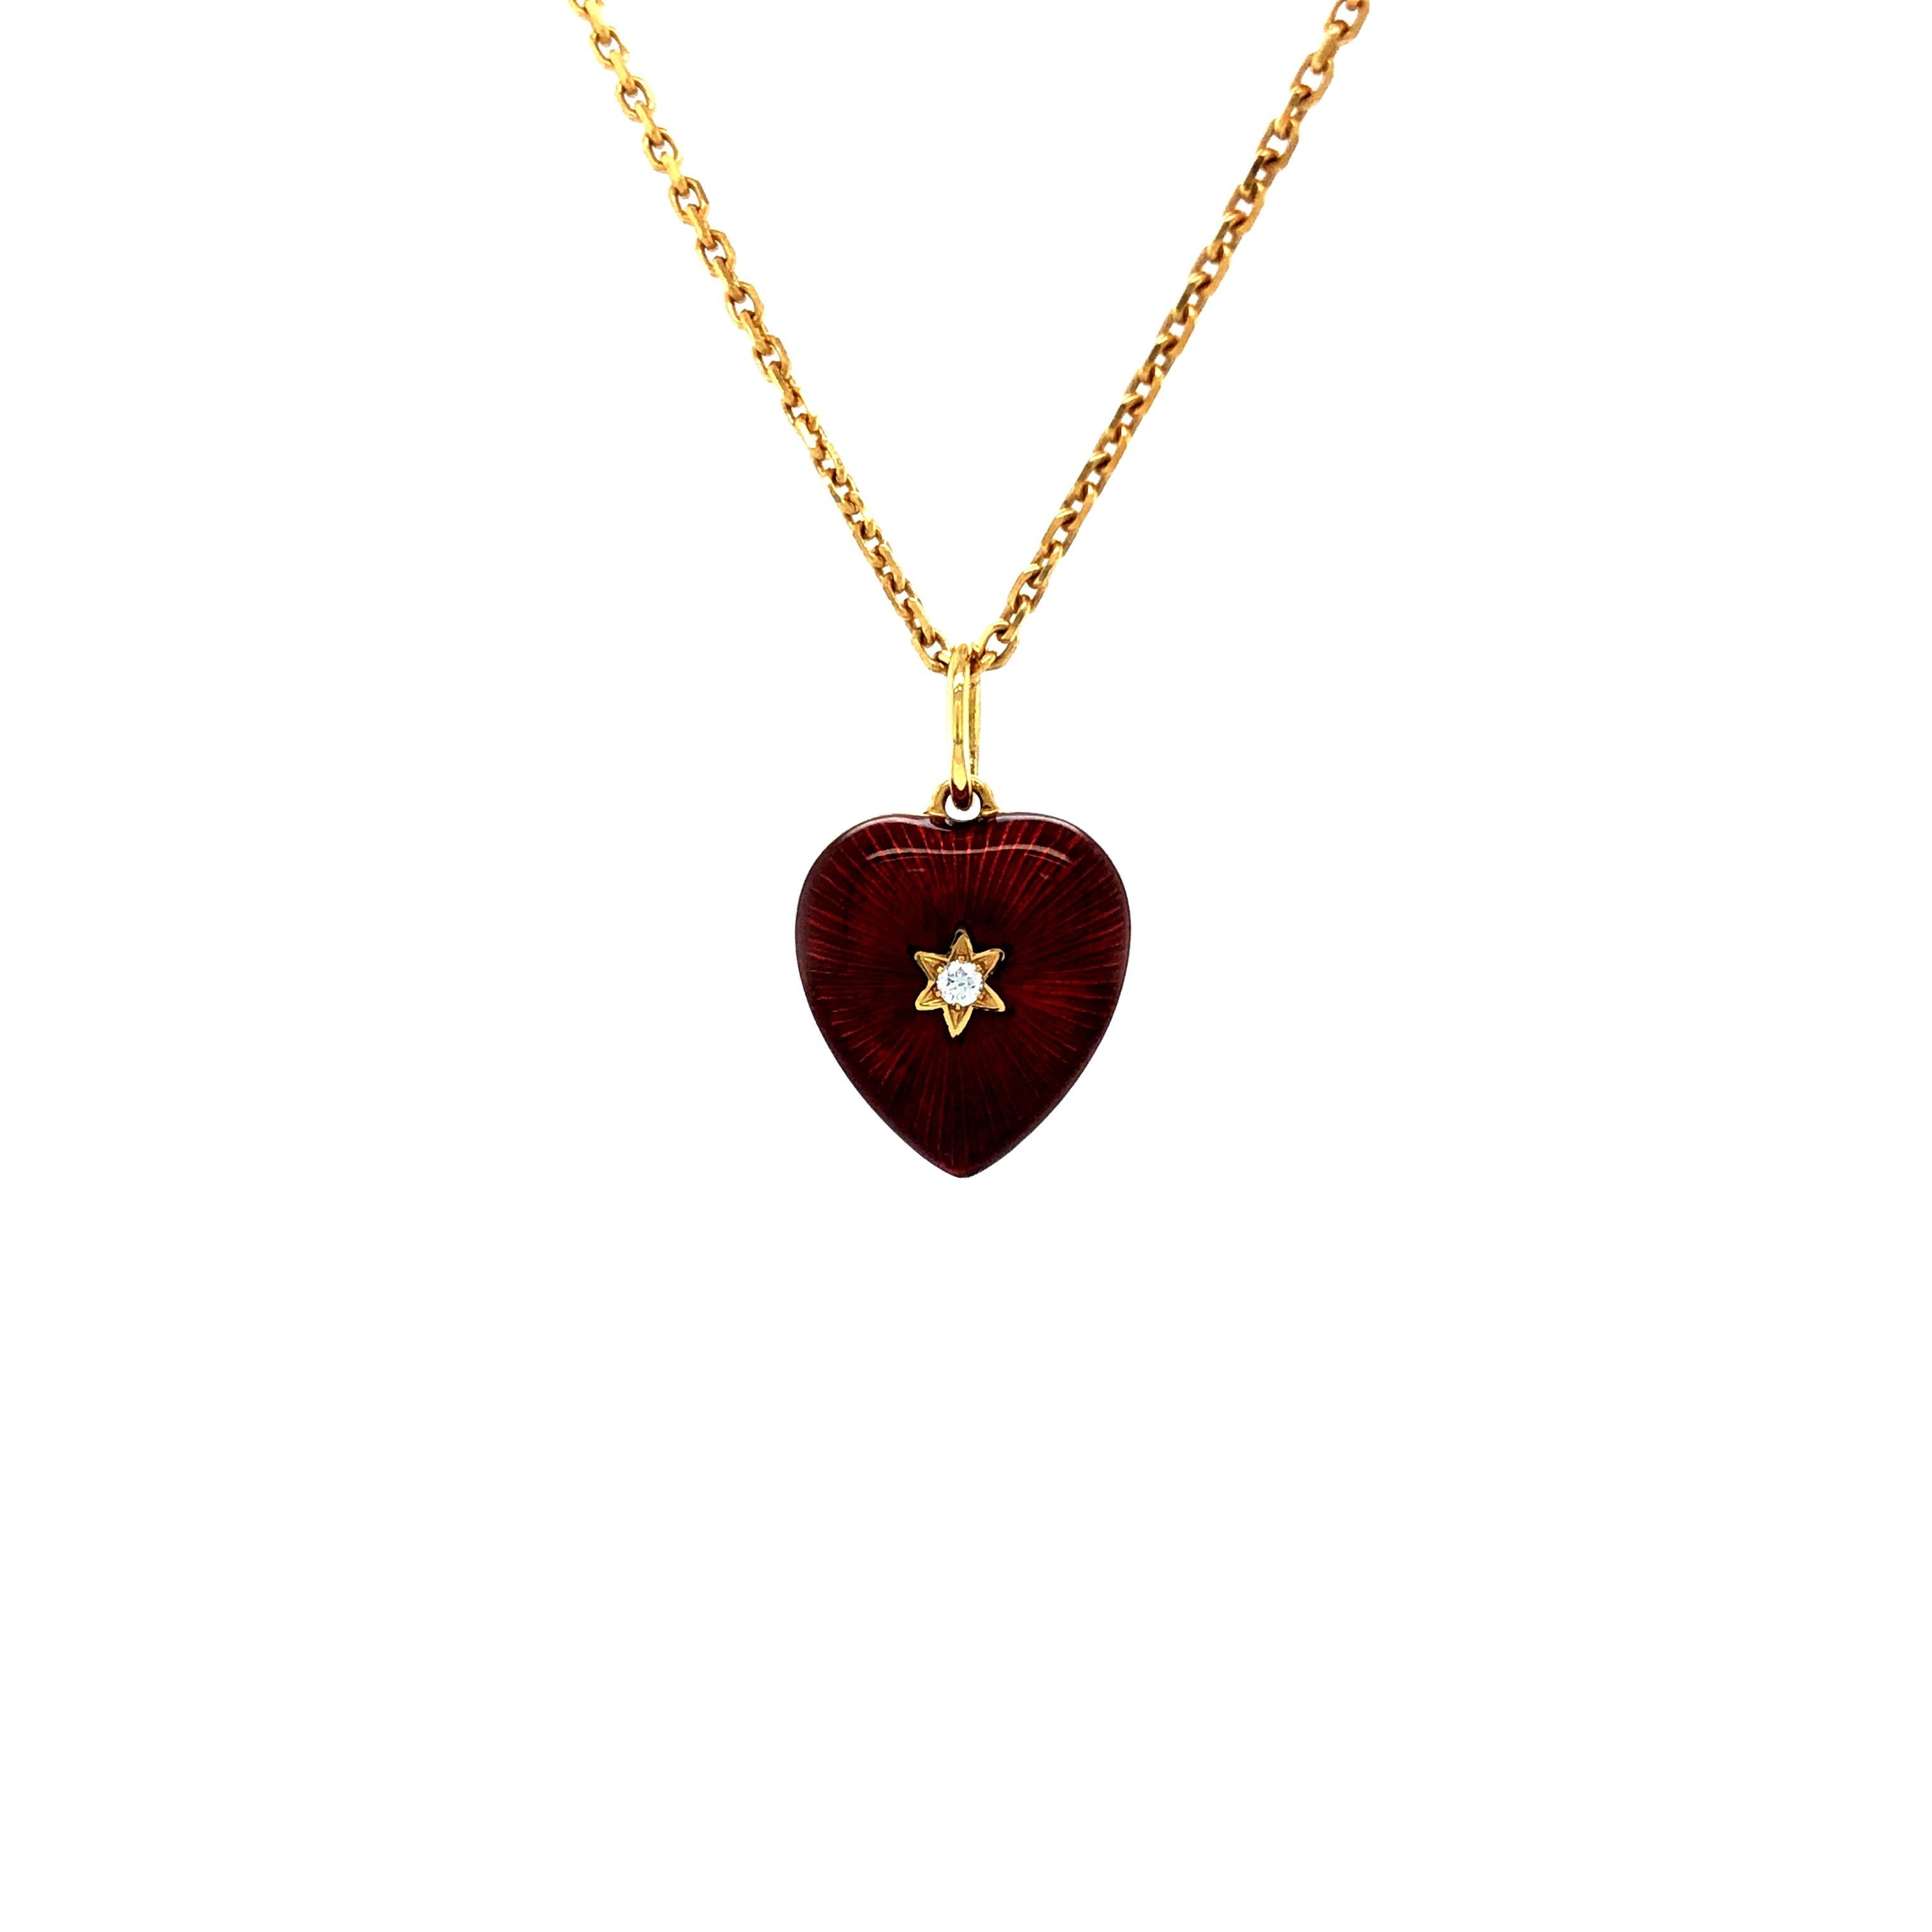 Victor Mayer heart pendant with star 18k yellow gold, Hallmark Collection, red vitreous enamel, 2 diamonds, total 0.03 ct, G VS brilliant cut

About the creator Victor Mayer
Victor Mayer is internationally renowned for elegant timeless designs and